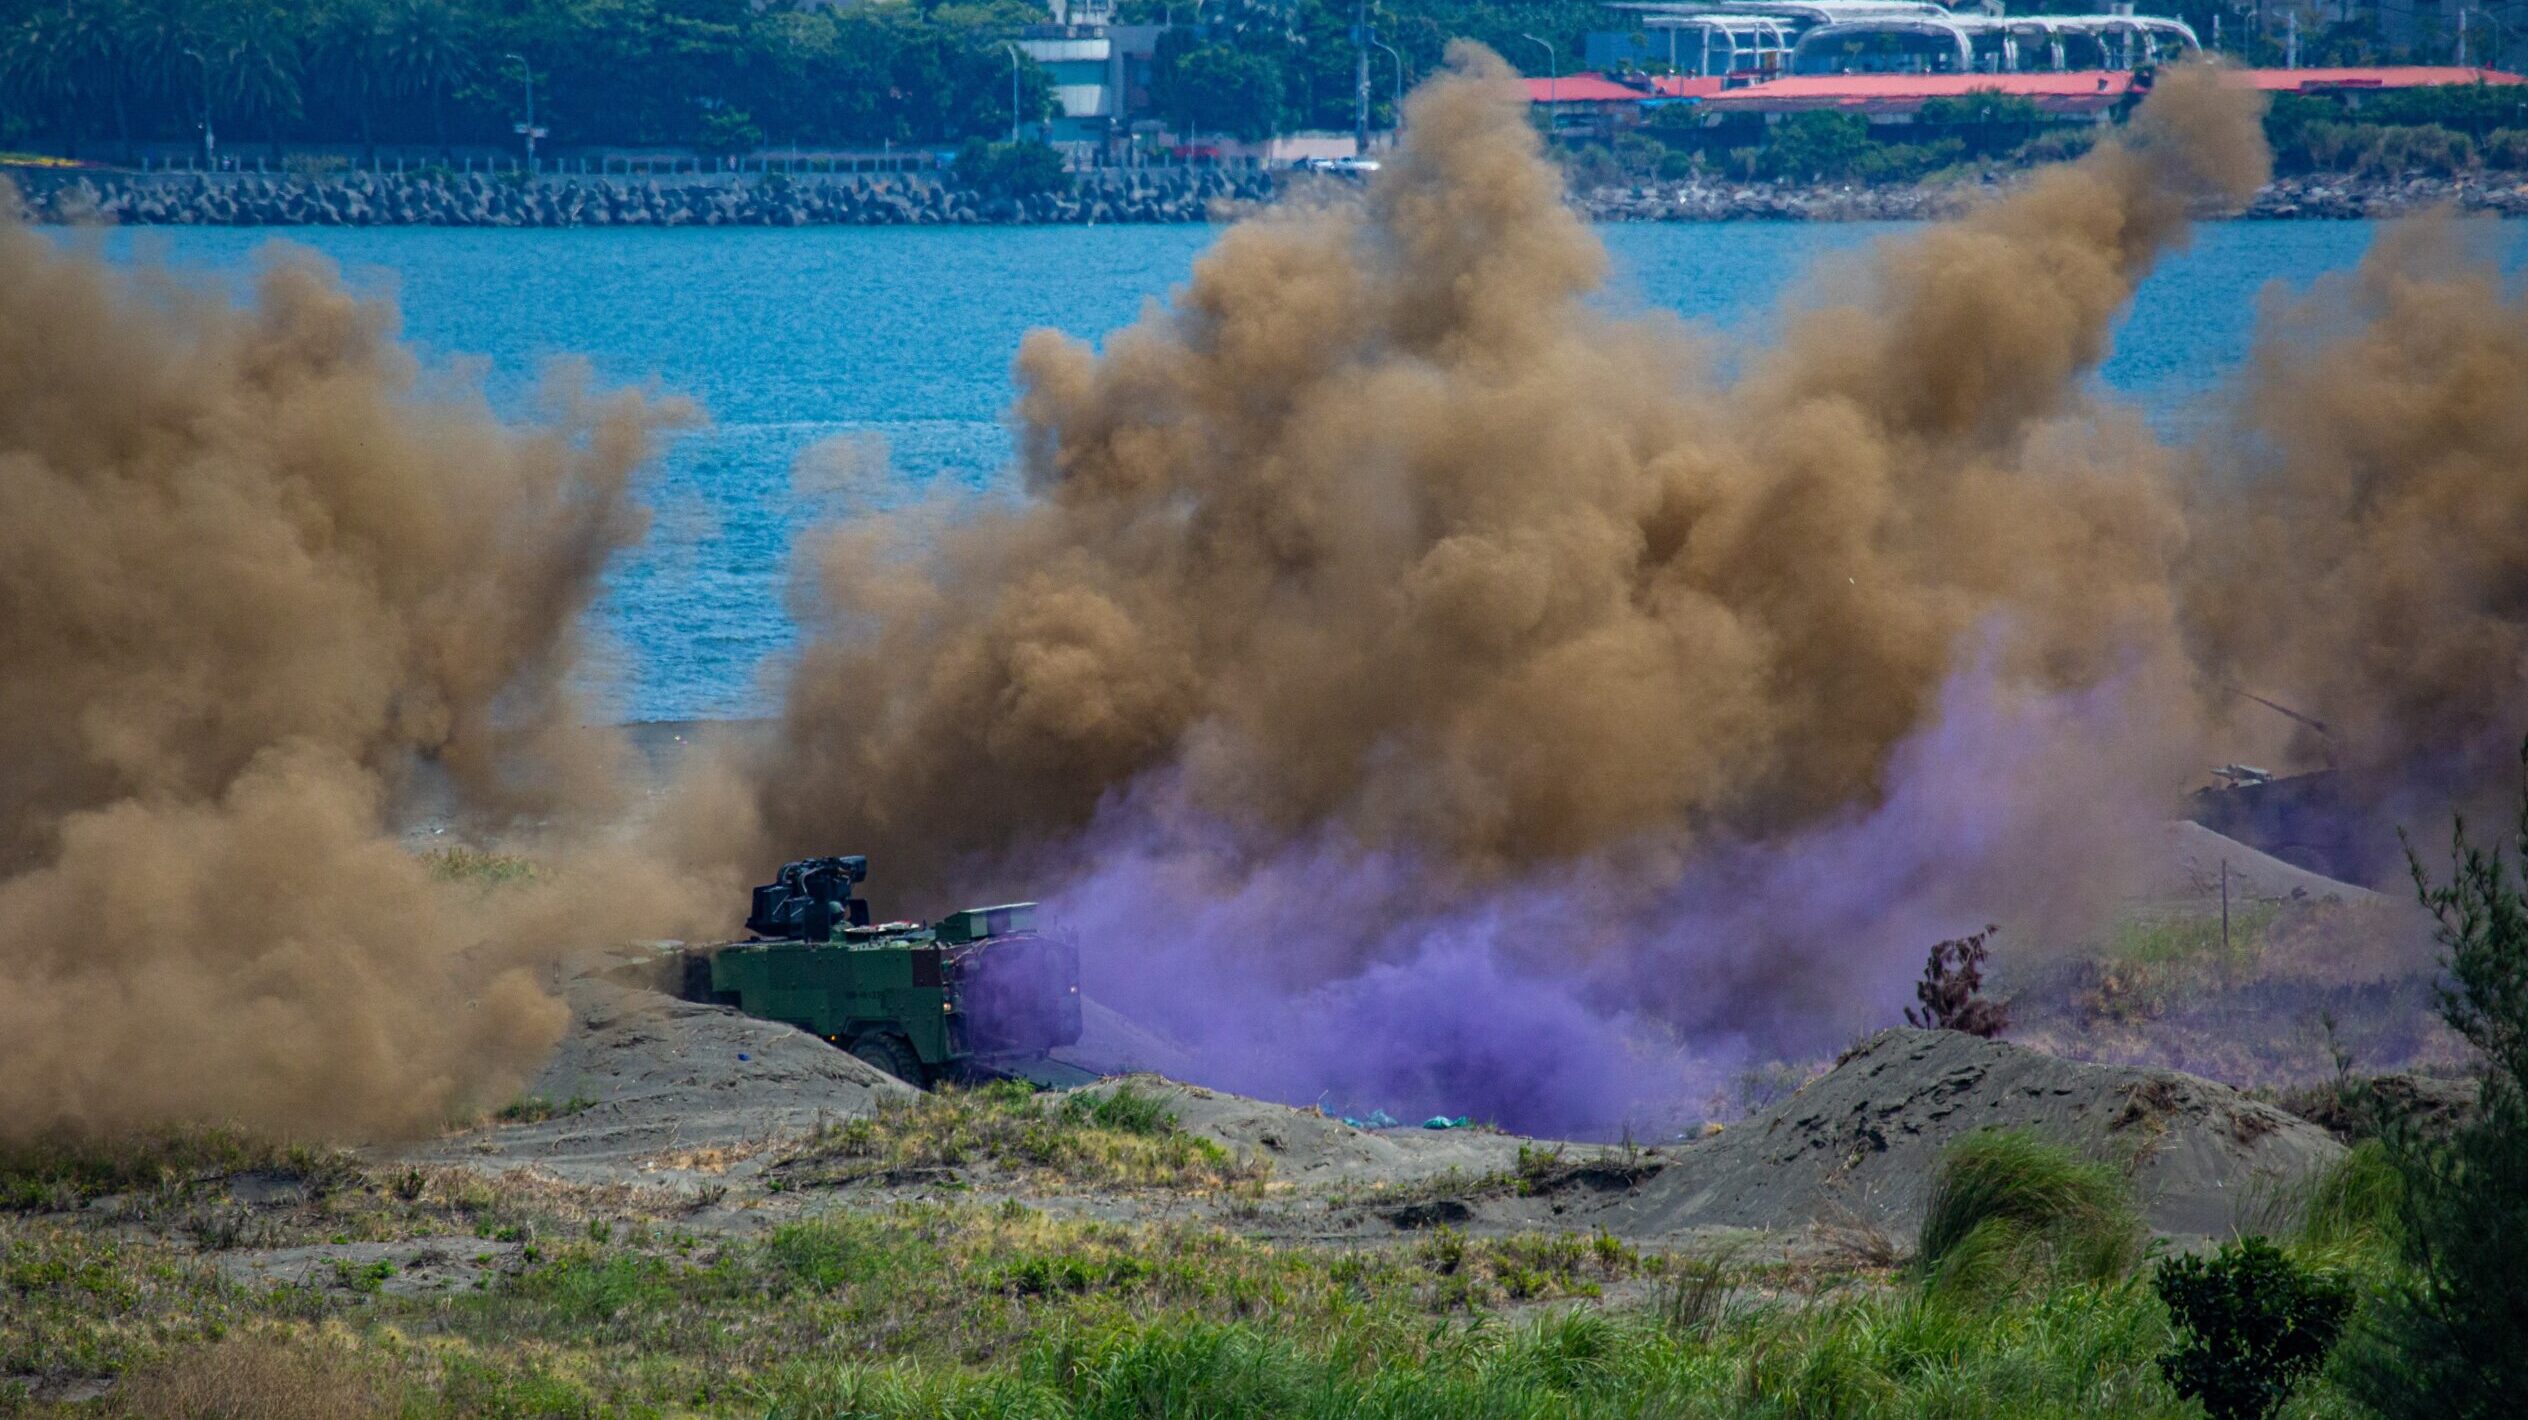 Taiwan Conducts Live Fire Military Exercises